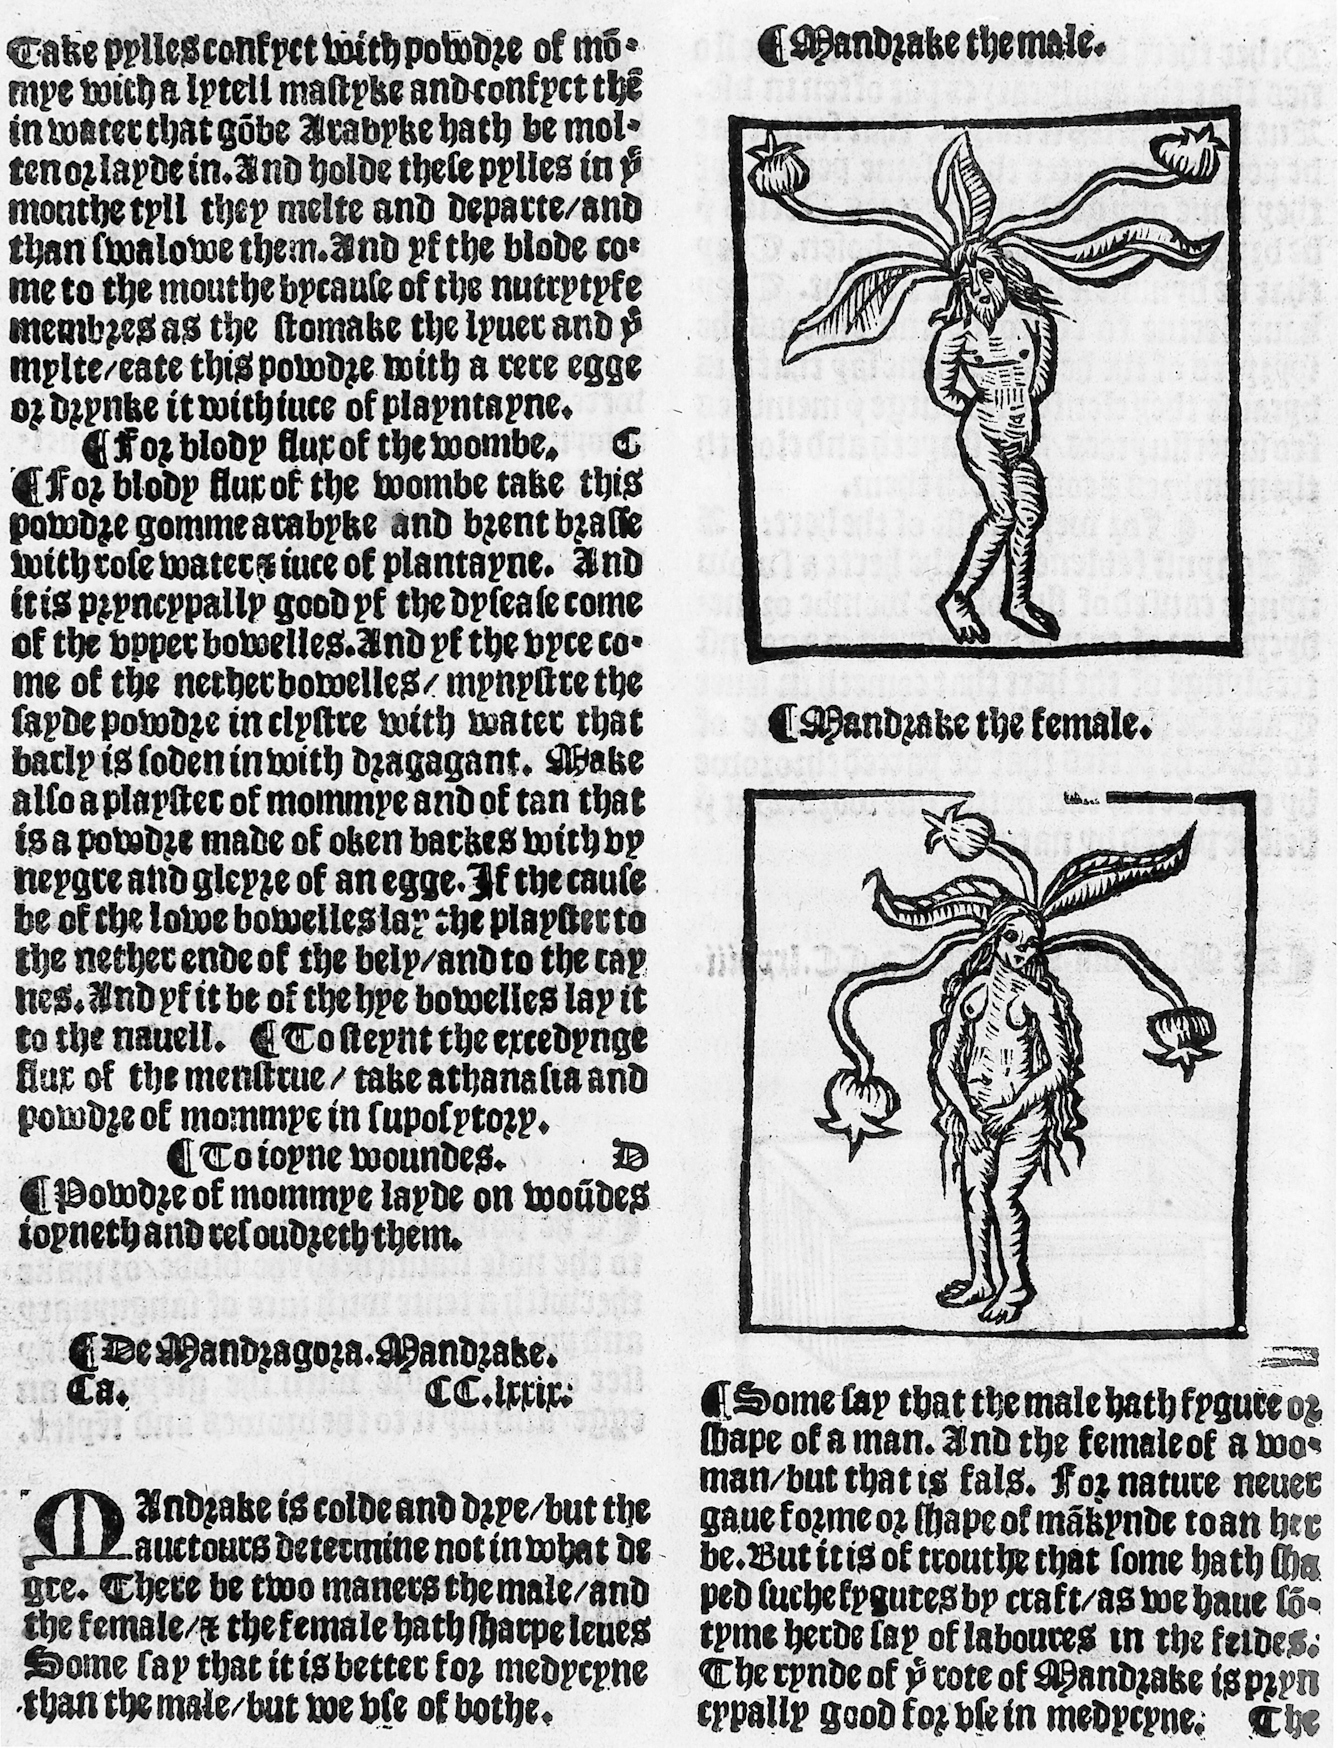 Page from a 16th century English herbal showing the male and female humanoid versions of the mandrake plant, accompanied by text in Middle English.